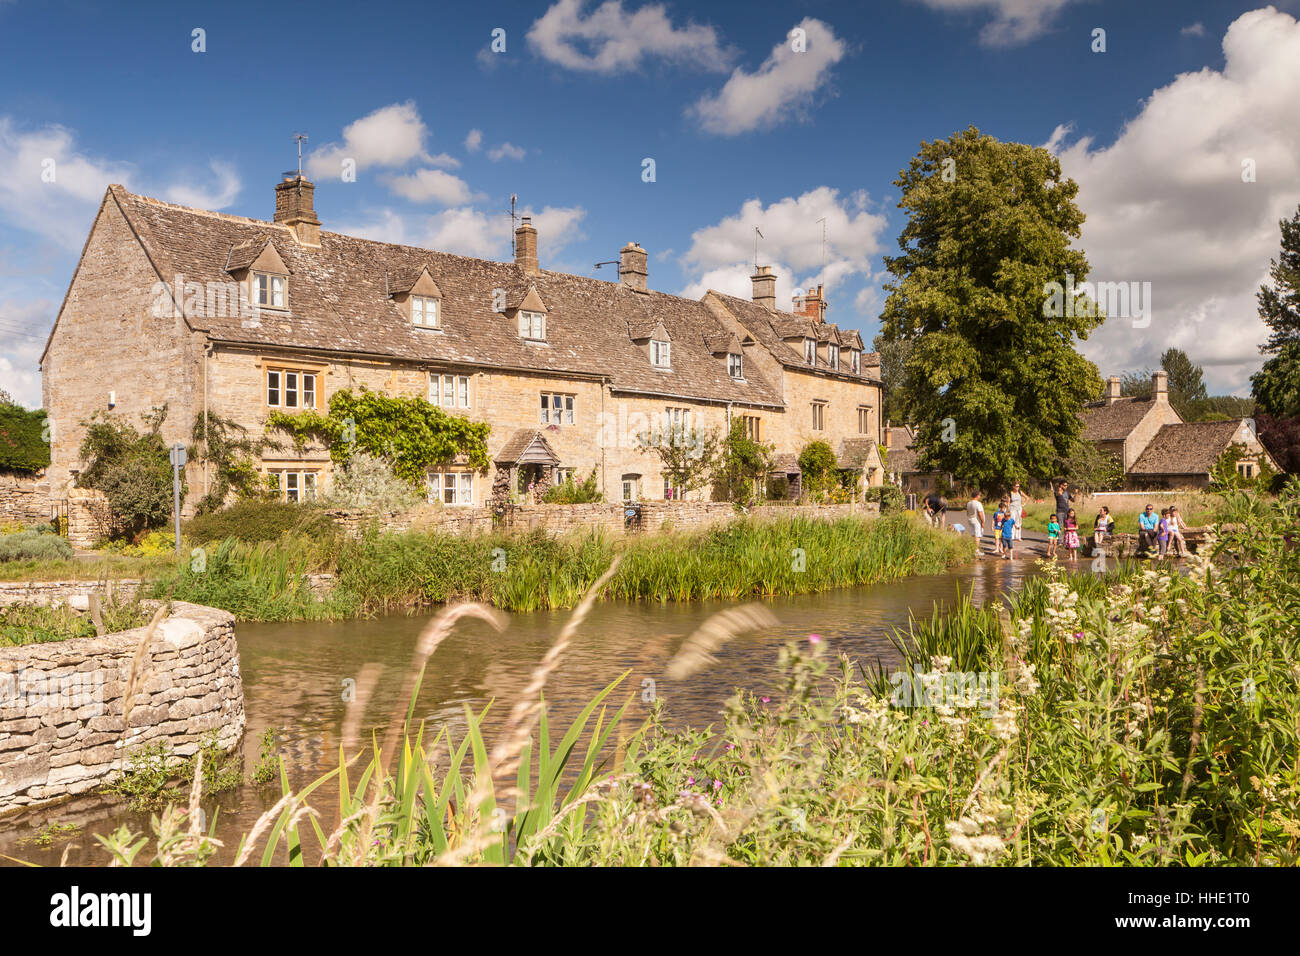 Typical Cotswolds stone houses in Lower Slaughter, Gloucestershire, UK Stock Photo